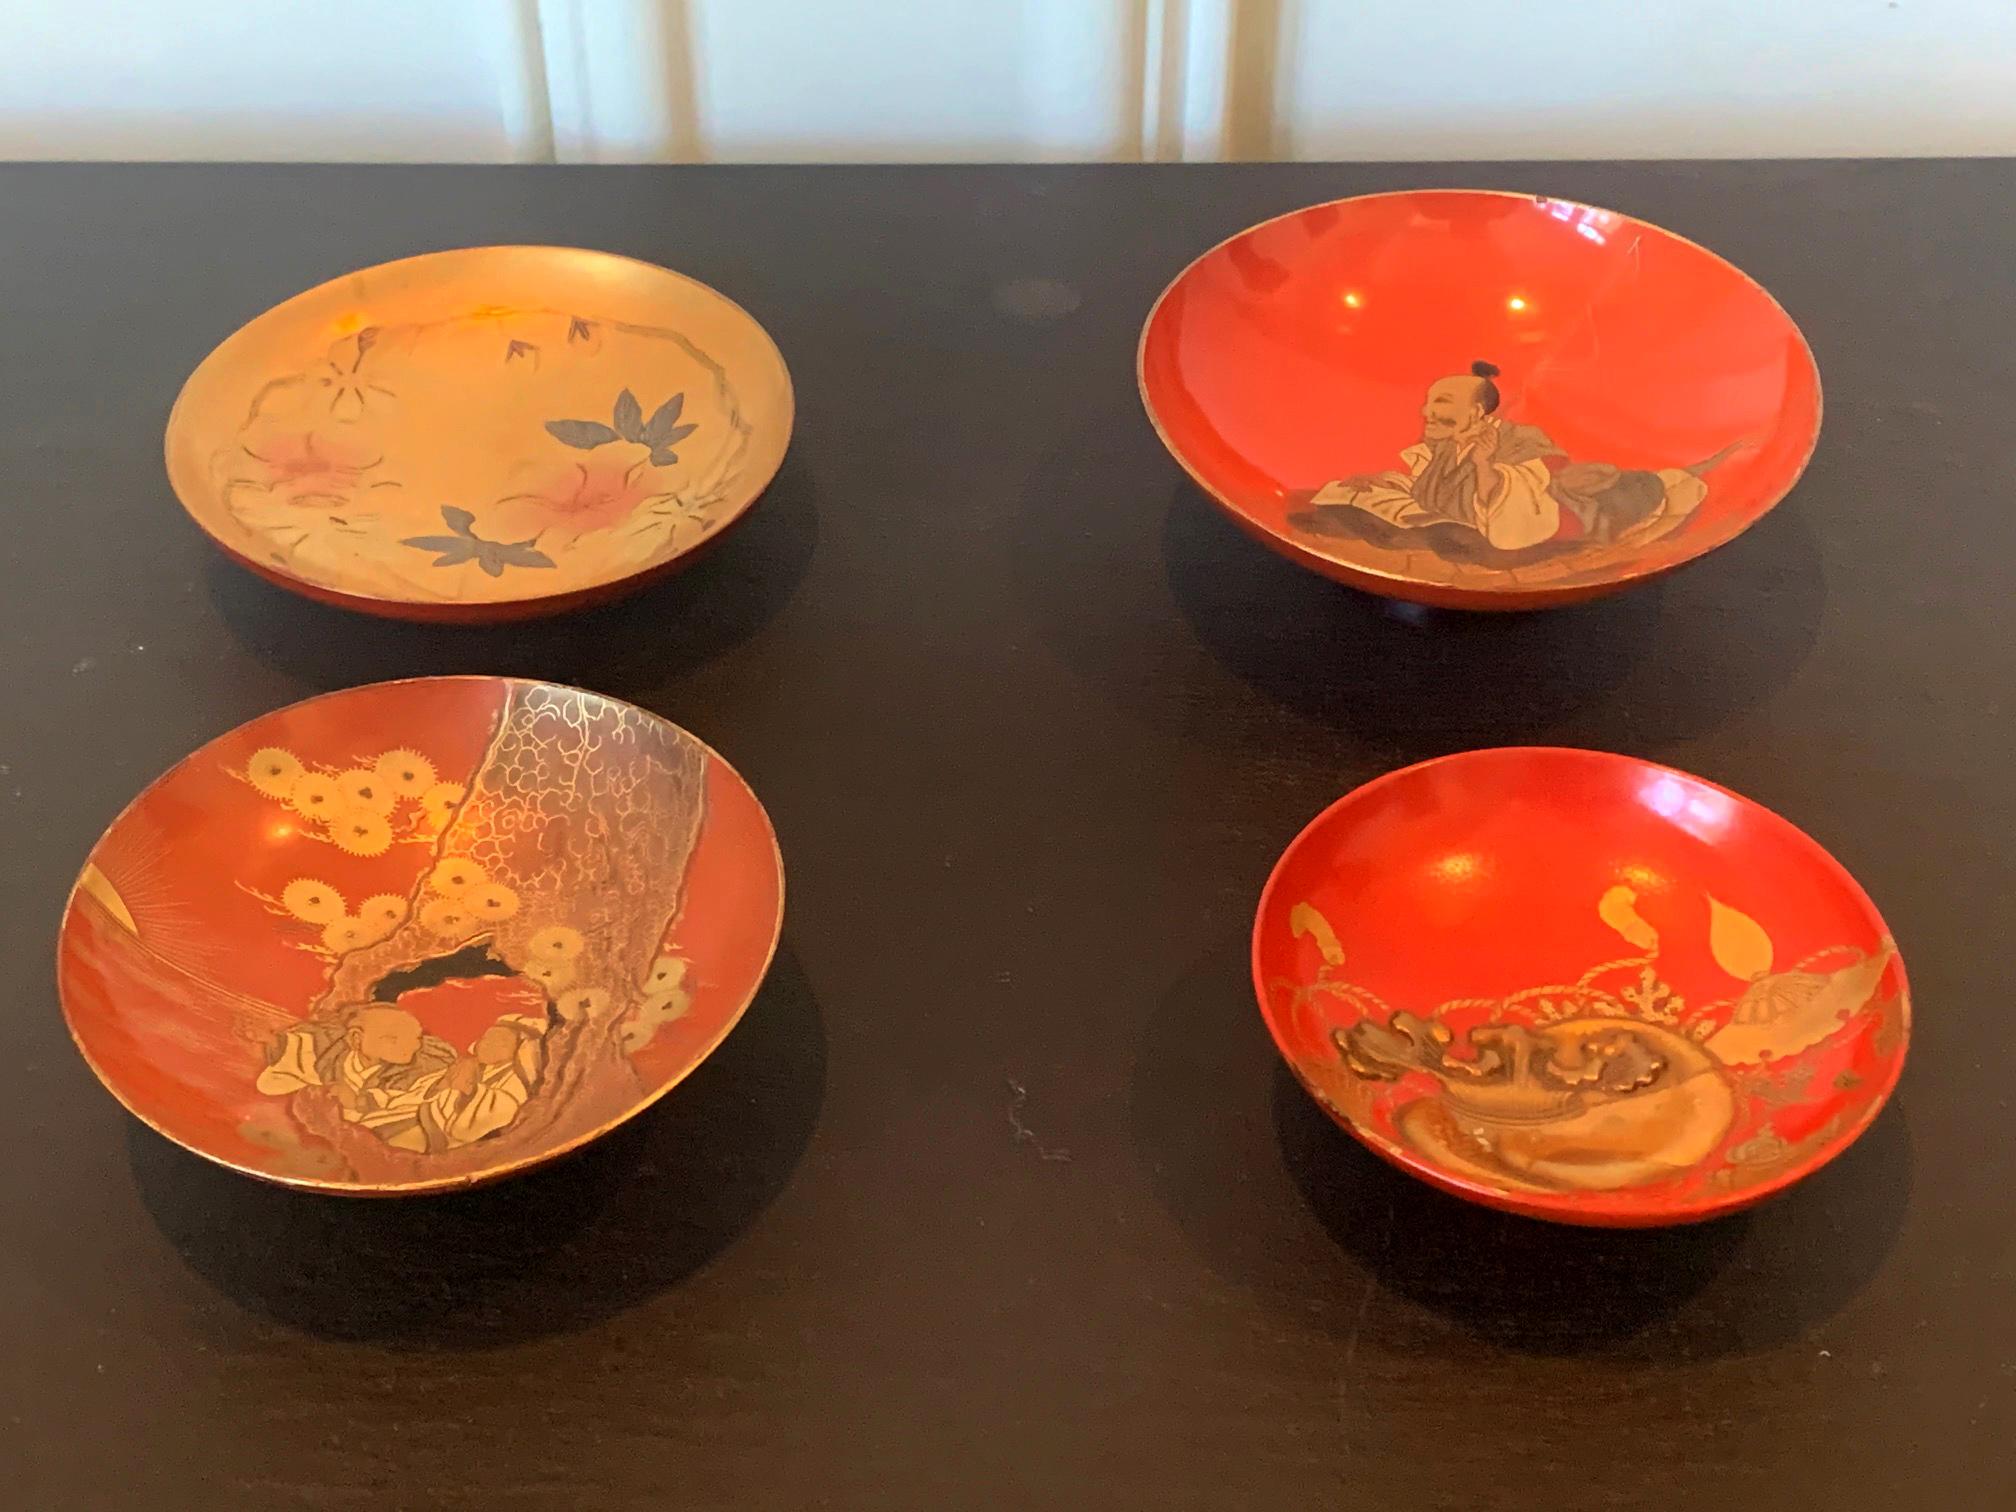 An assemble of four lacquerware sake cups from Meiji period Japan circa late 19th century. The shadow cups on an elevated stem were used by the nobles during to drink sake at feast. Each with individual Maki-e design; some with high relief